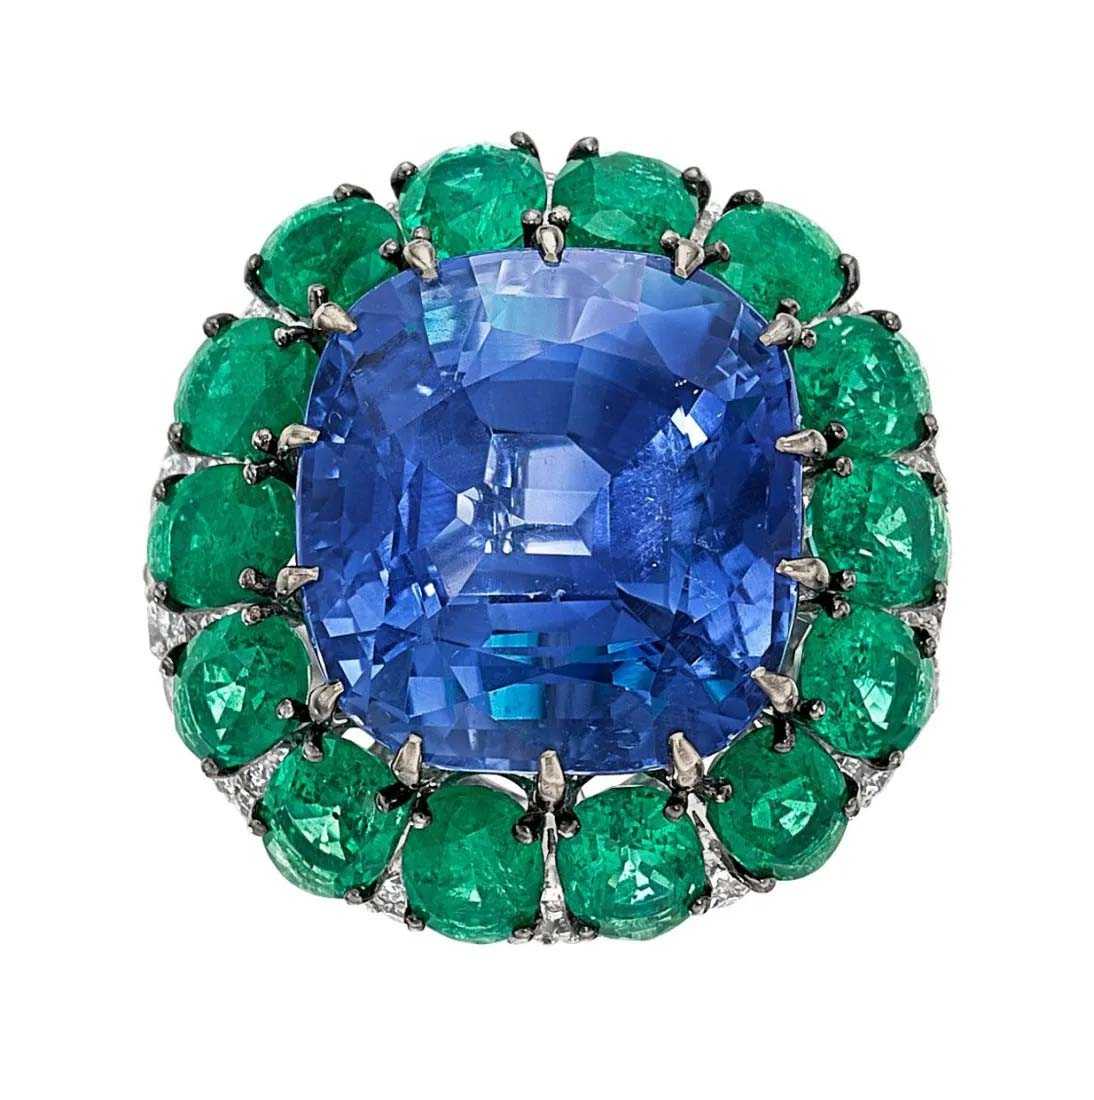 Burmese sapphire, emerald, and white gold ring, estimated at $80,000-$100,000 at Heritage.